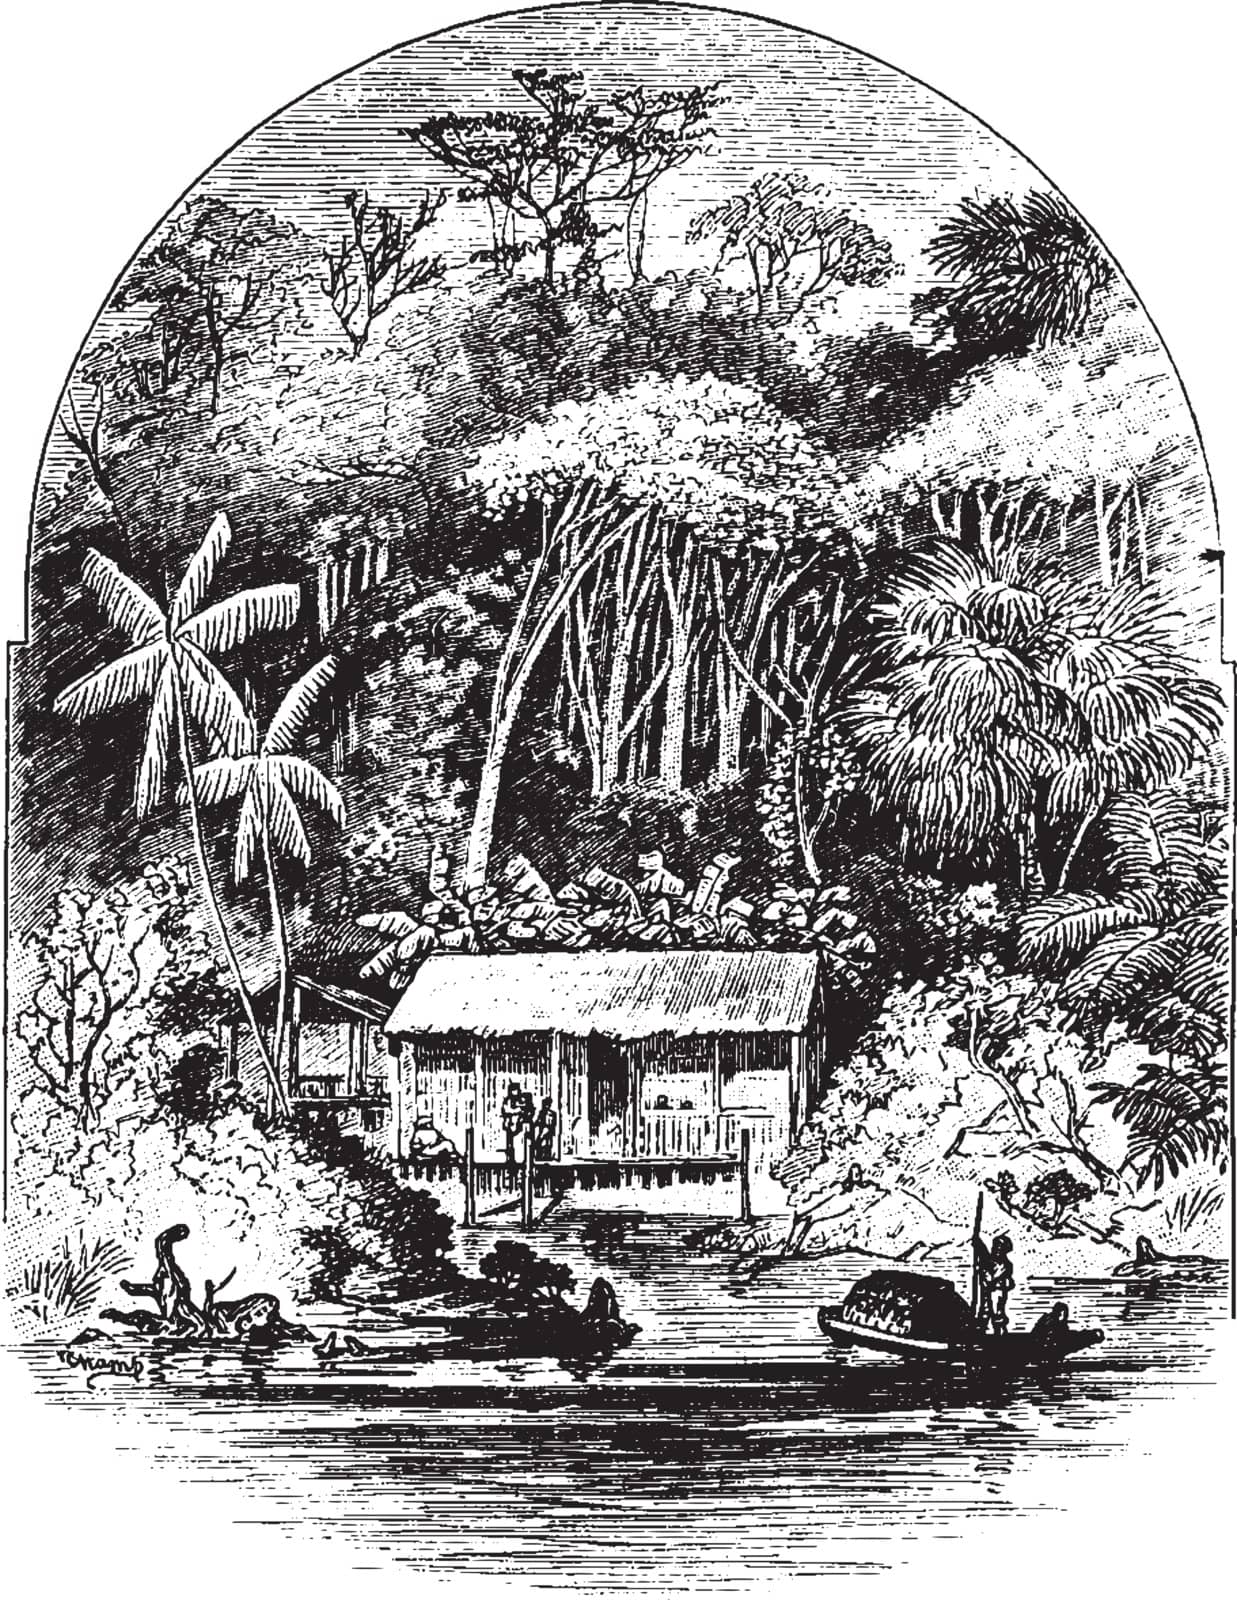 In this sketch one house is situated at the edge of the river along with Rubber tree. Some people are standing in front of the house, vintage line drawing or engraving illustration.